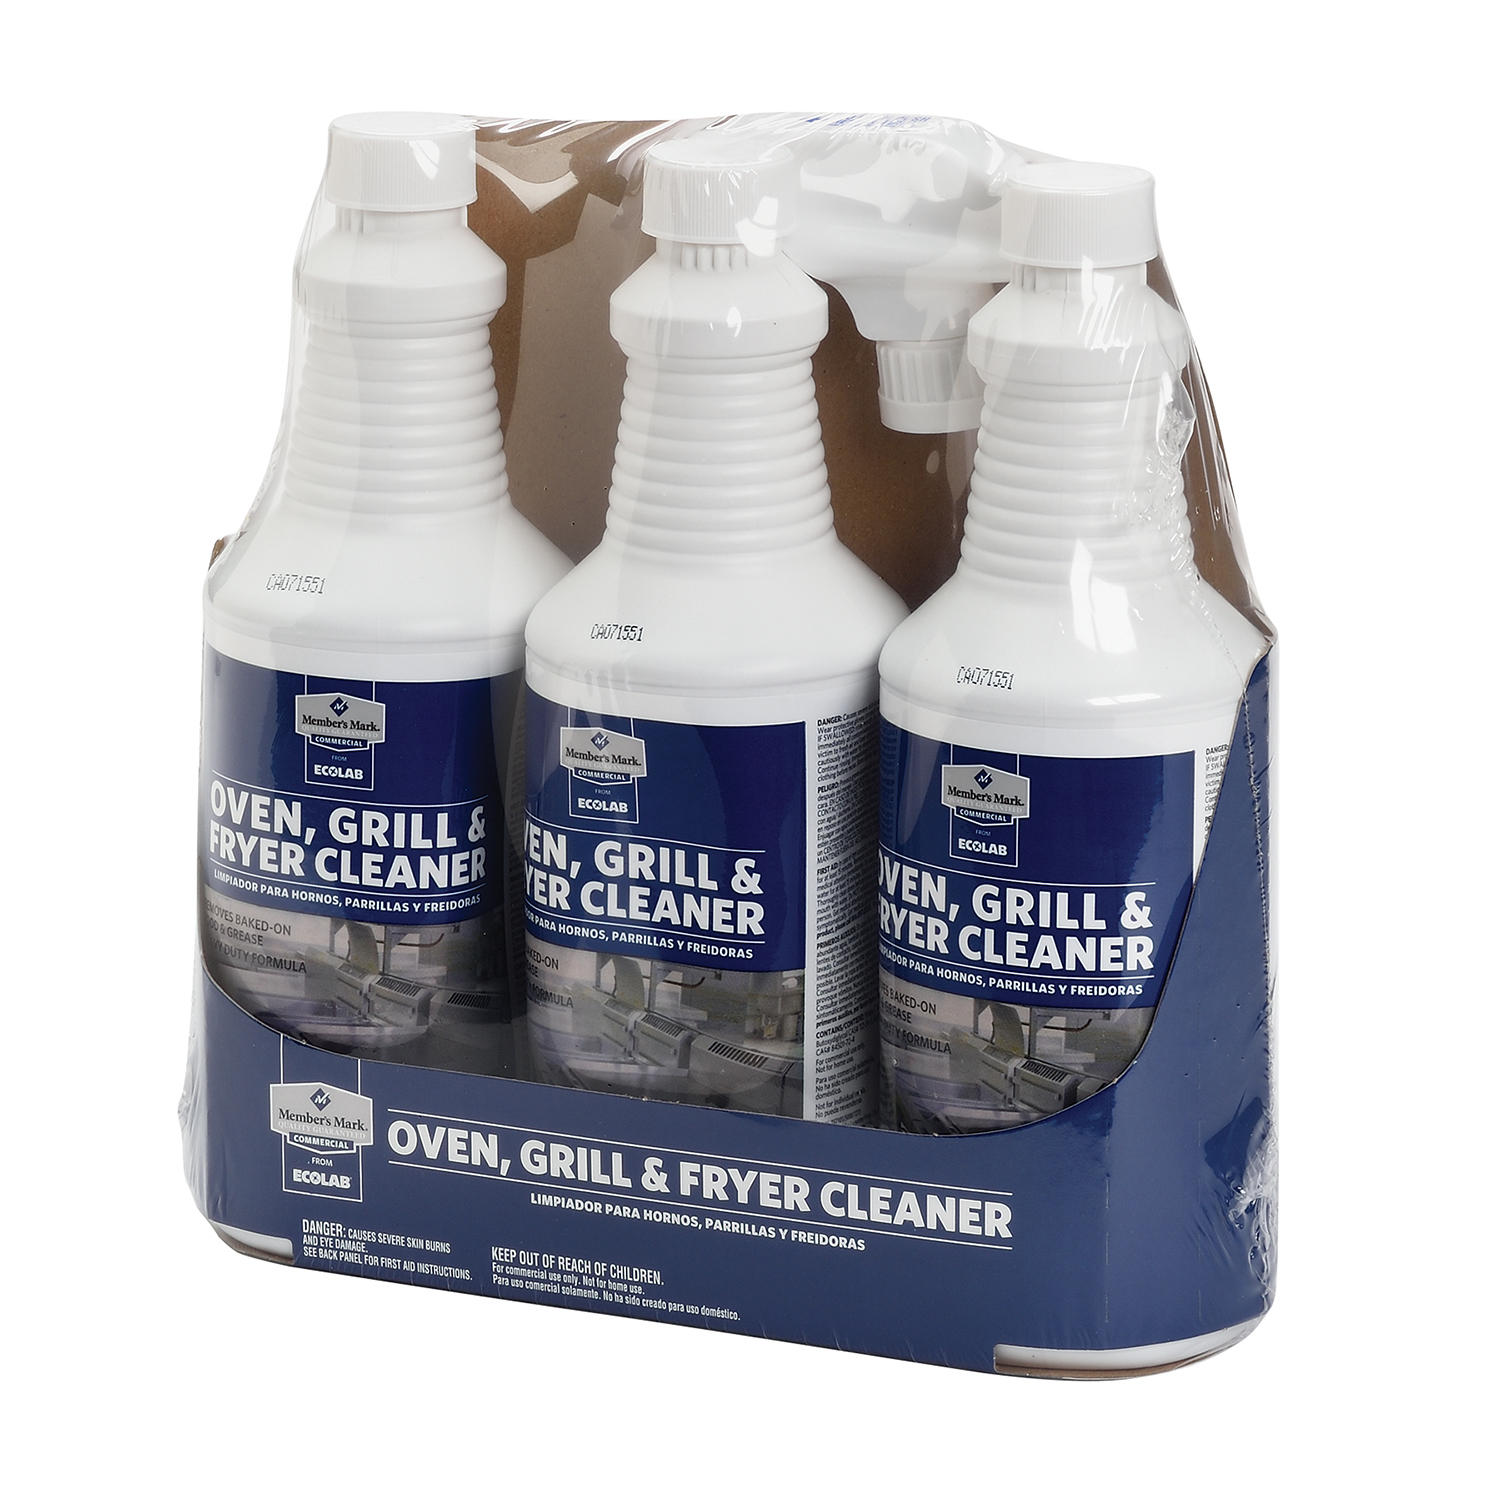 Member's Mark Commercial Oven, Grill and Fryer Cleaner (32 oz, 3 pk.)